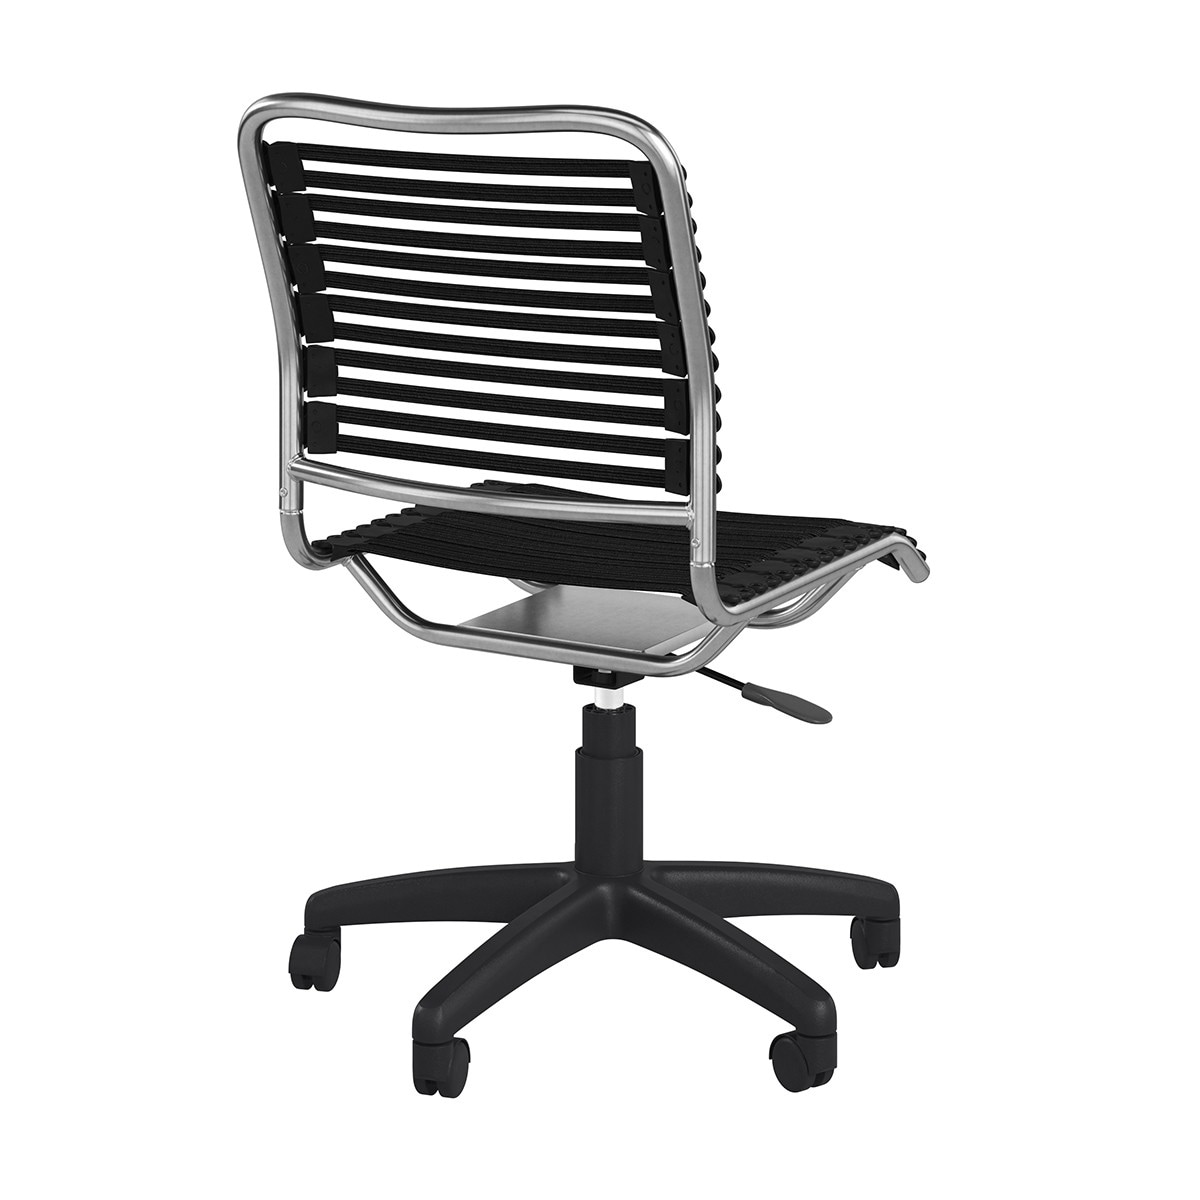 37" Black and Chrome Flat Bungee Cord Low Back Office Chair - 18.12" W x 37.21" H x 24" D